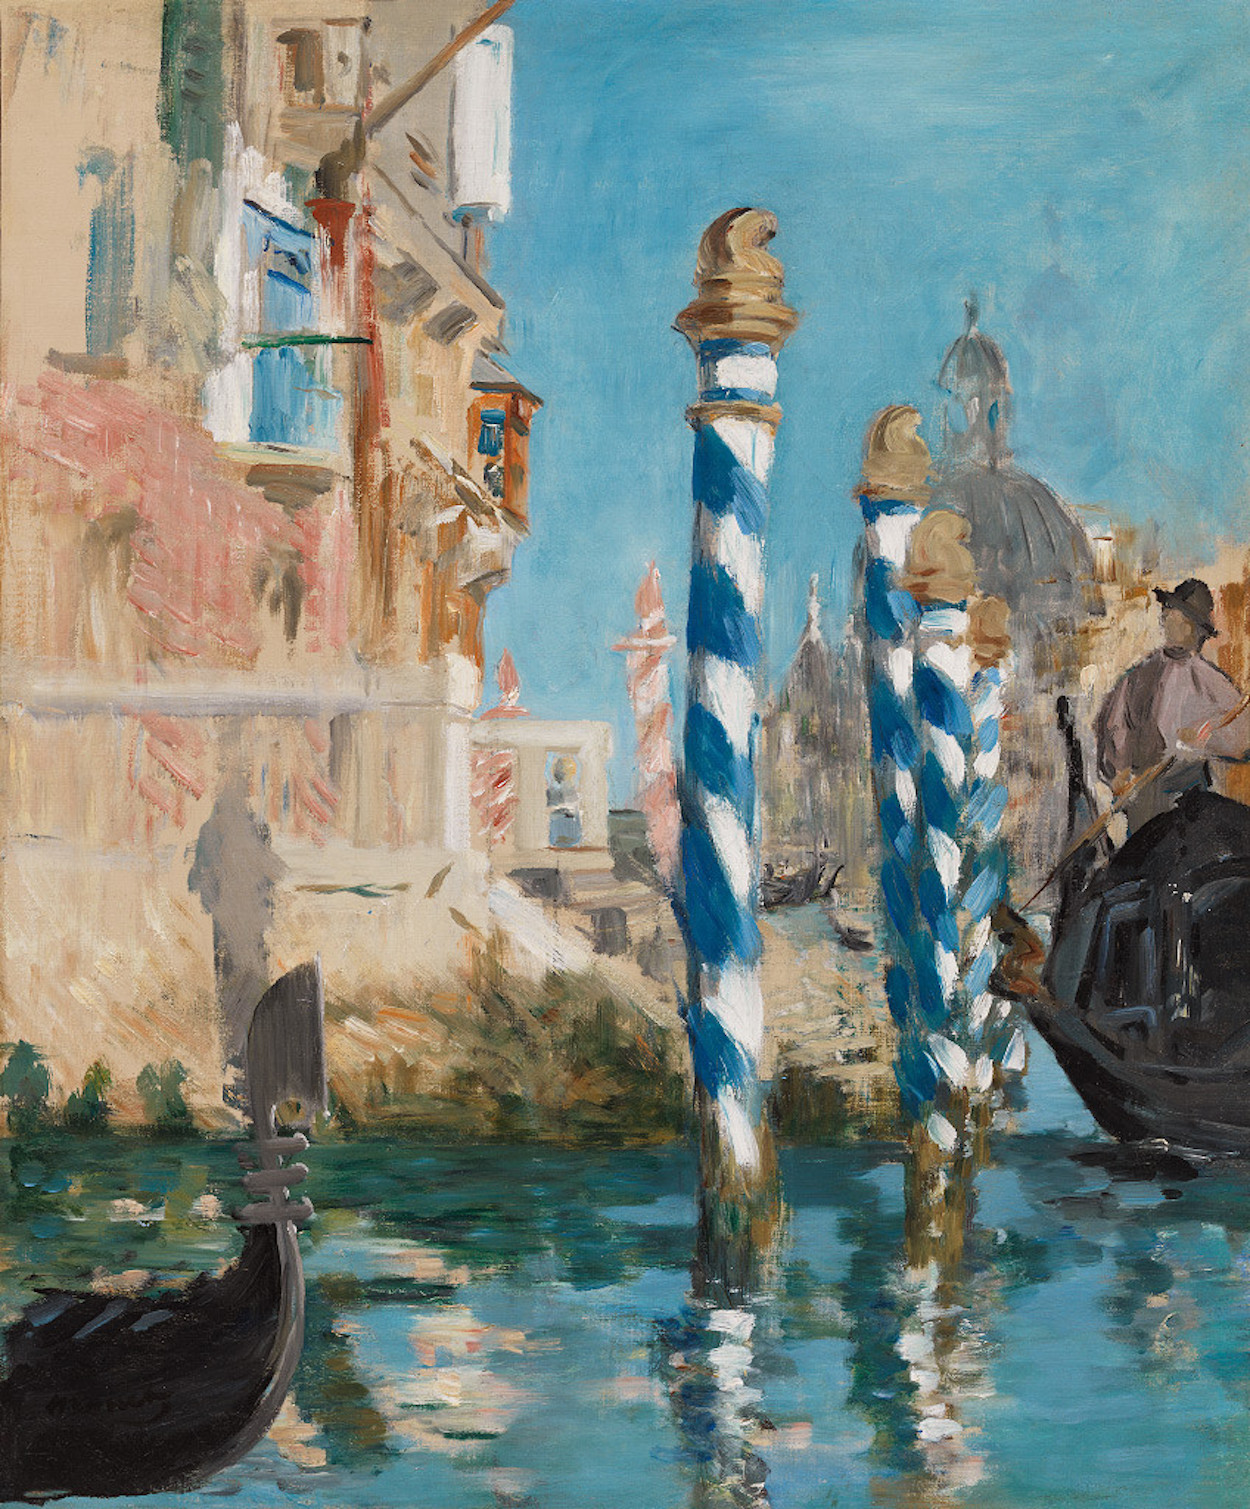 View in Venice – The Grand Canal by Édouard Manet - 1875 - 57 x 47.5 cm private collection